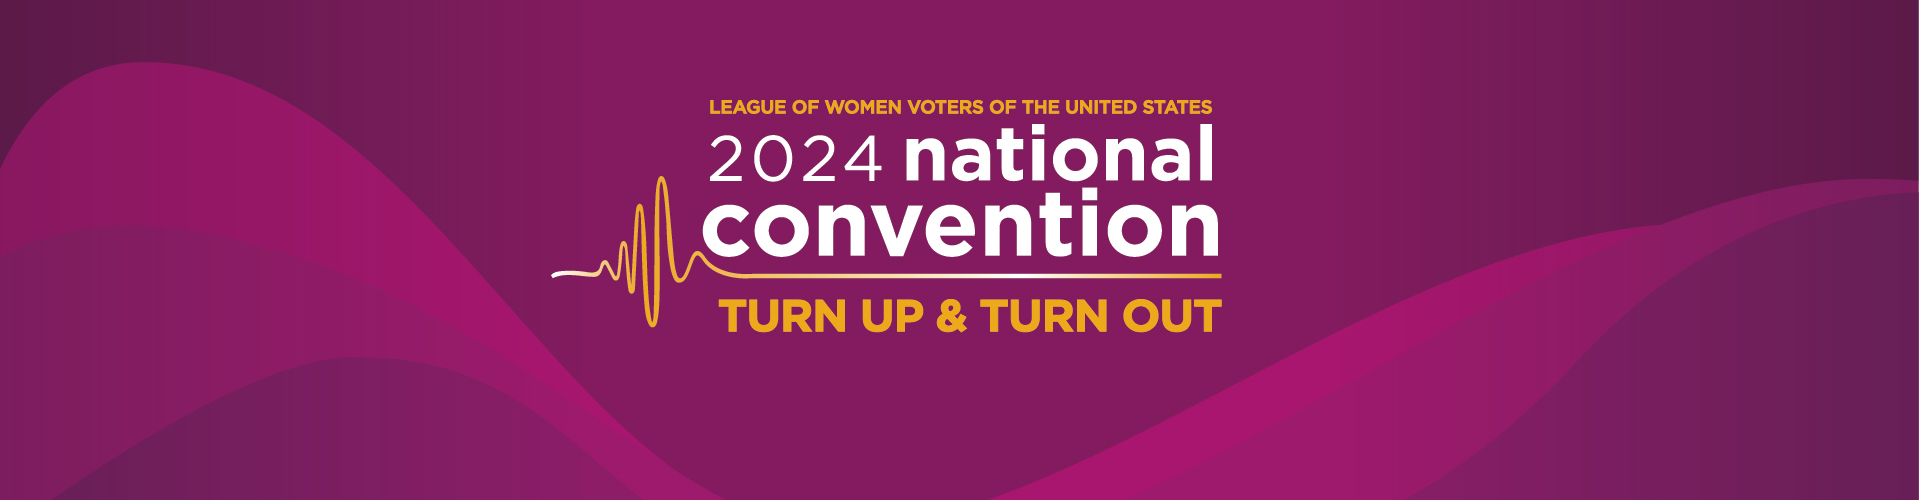 National Convention 2024